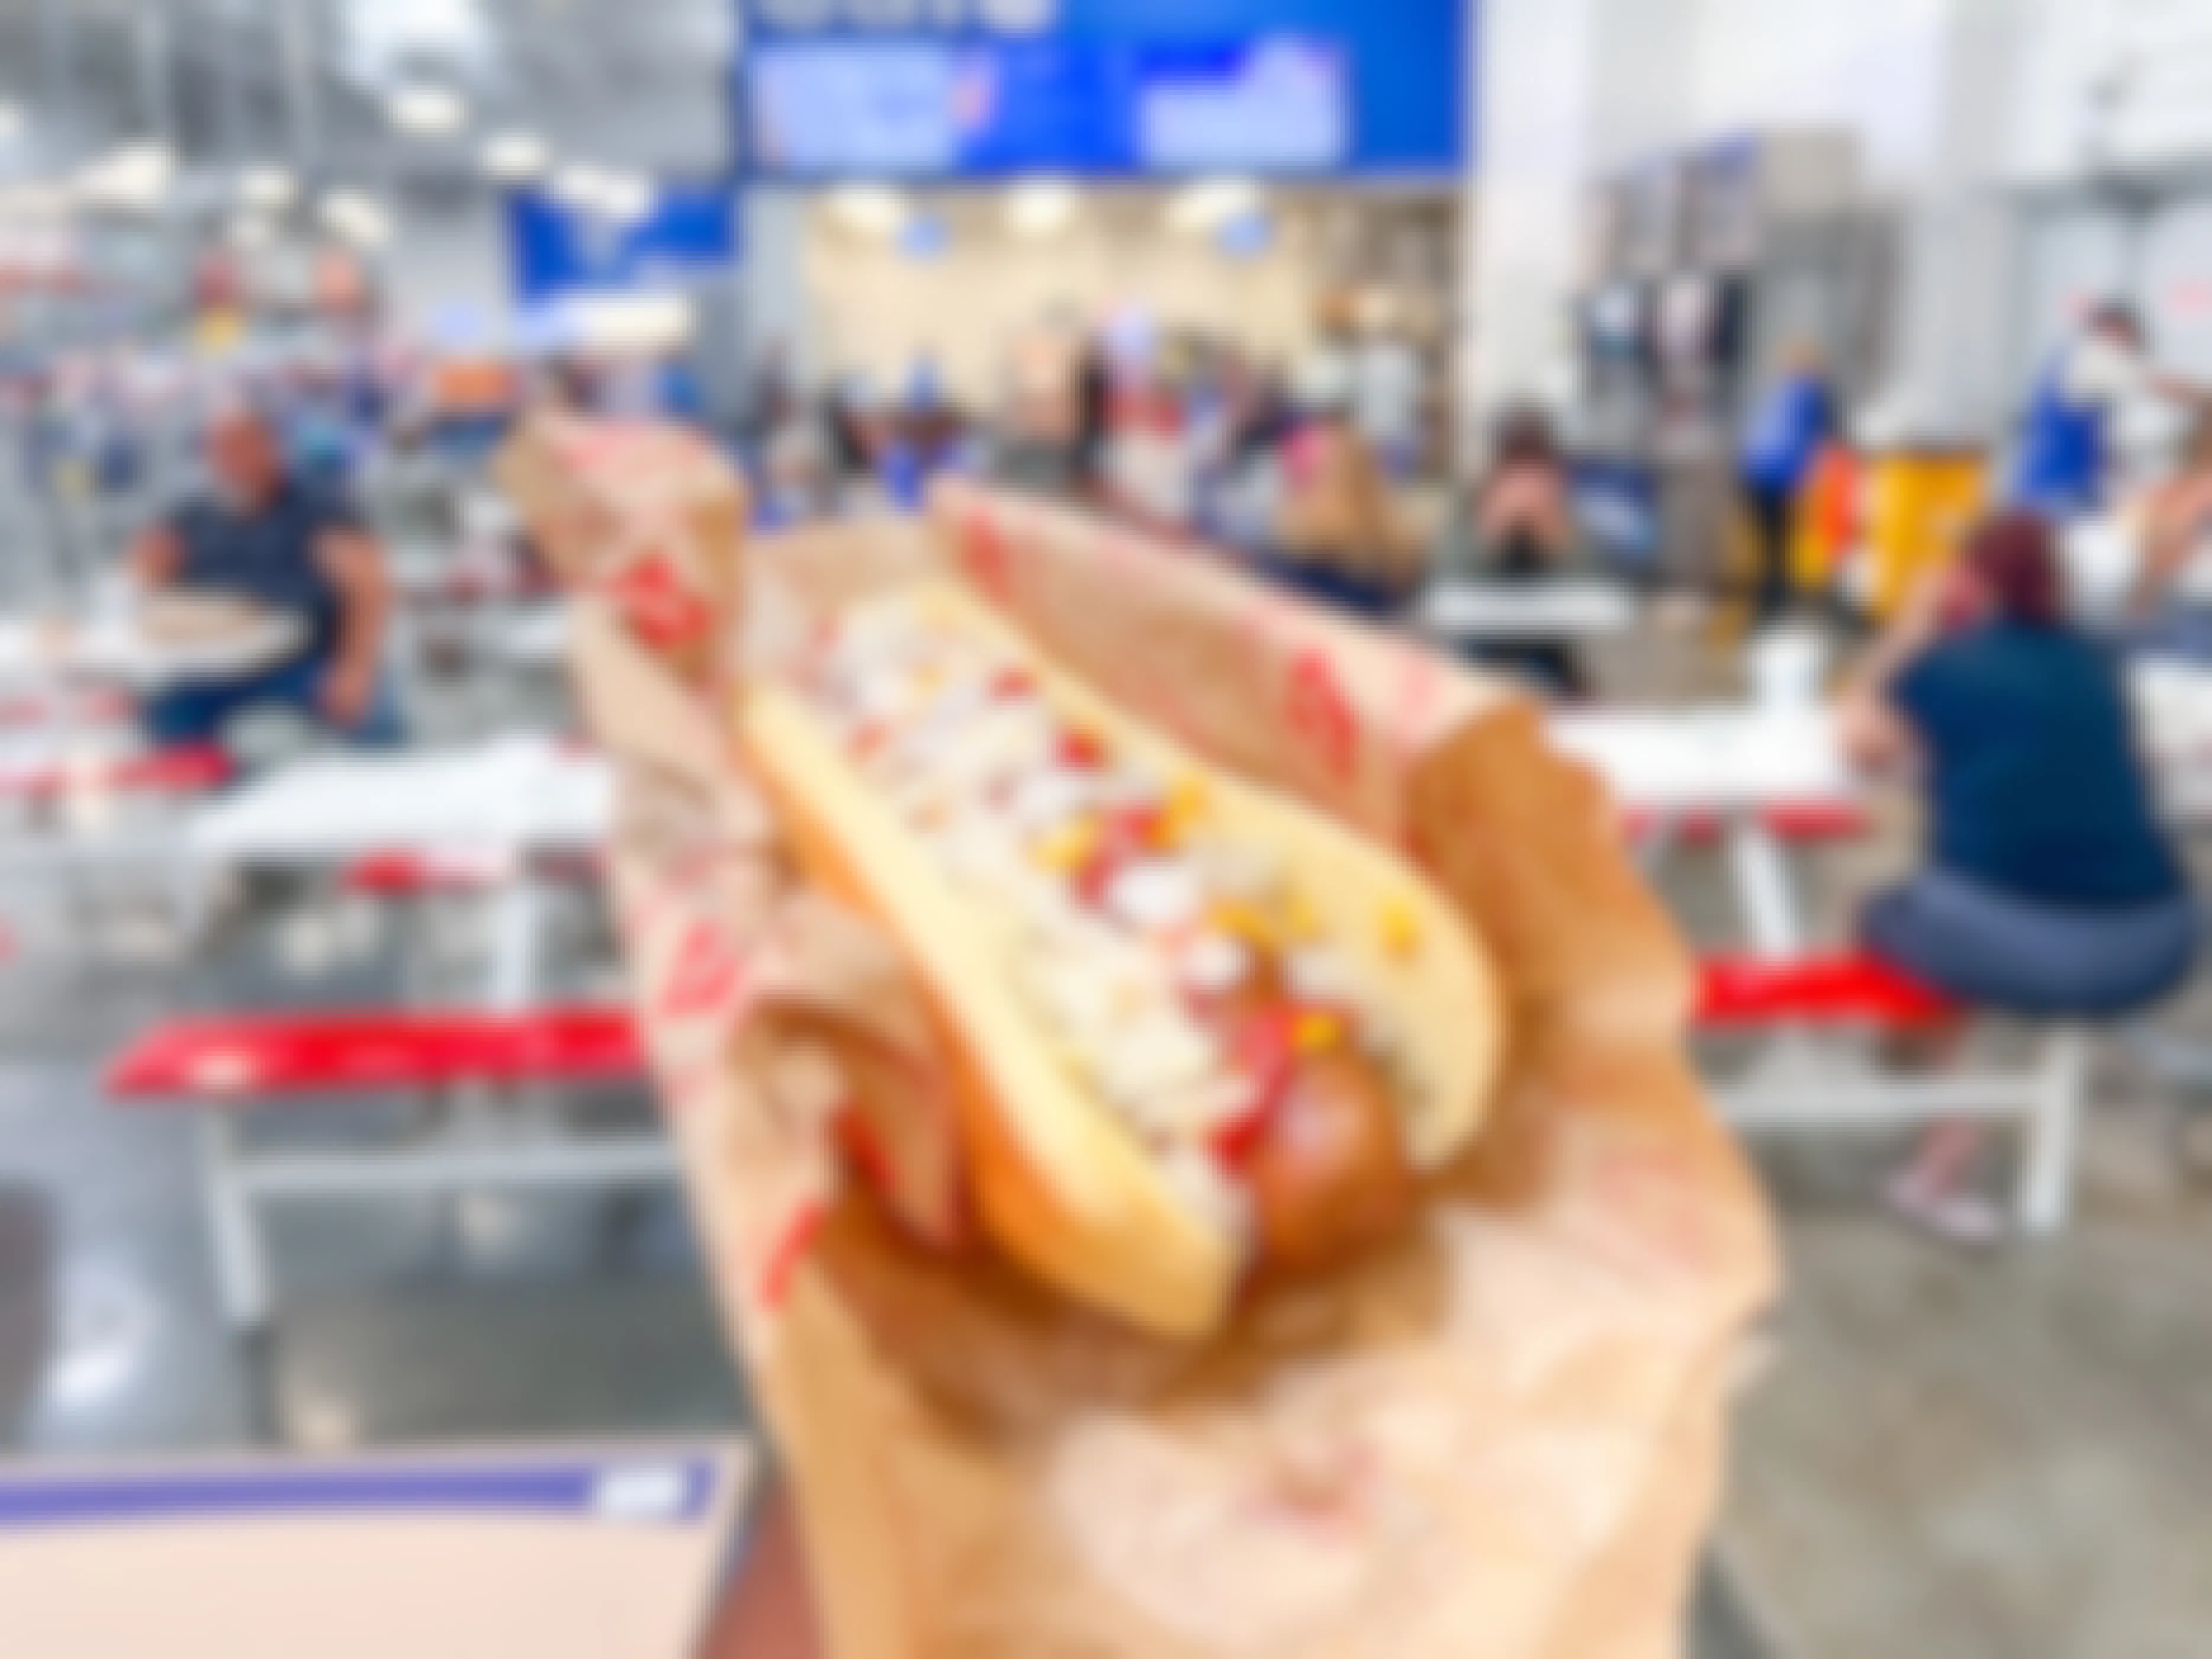 hand holding a Sam's Club Hot Dog inside the store